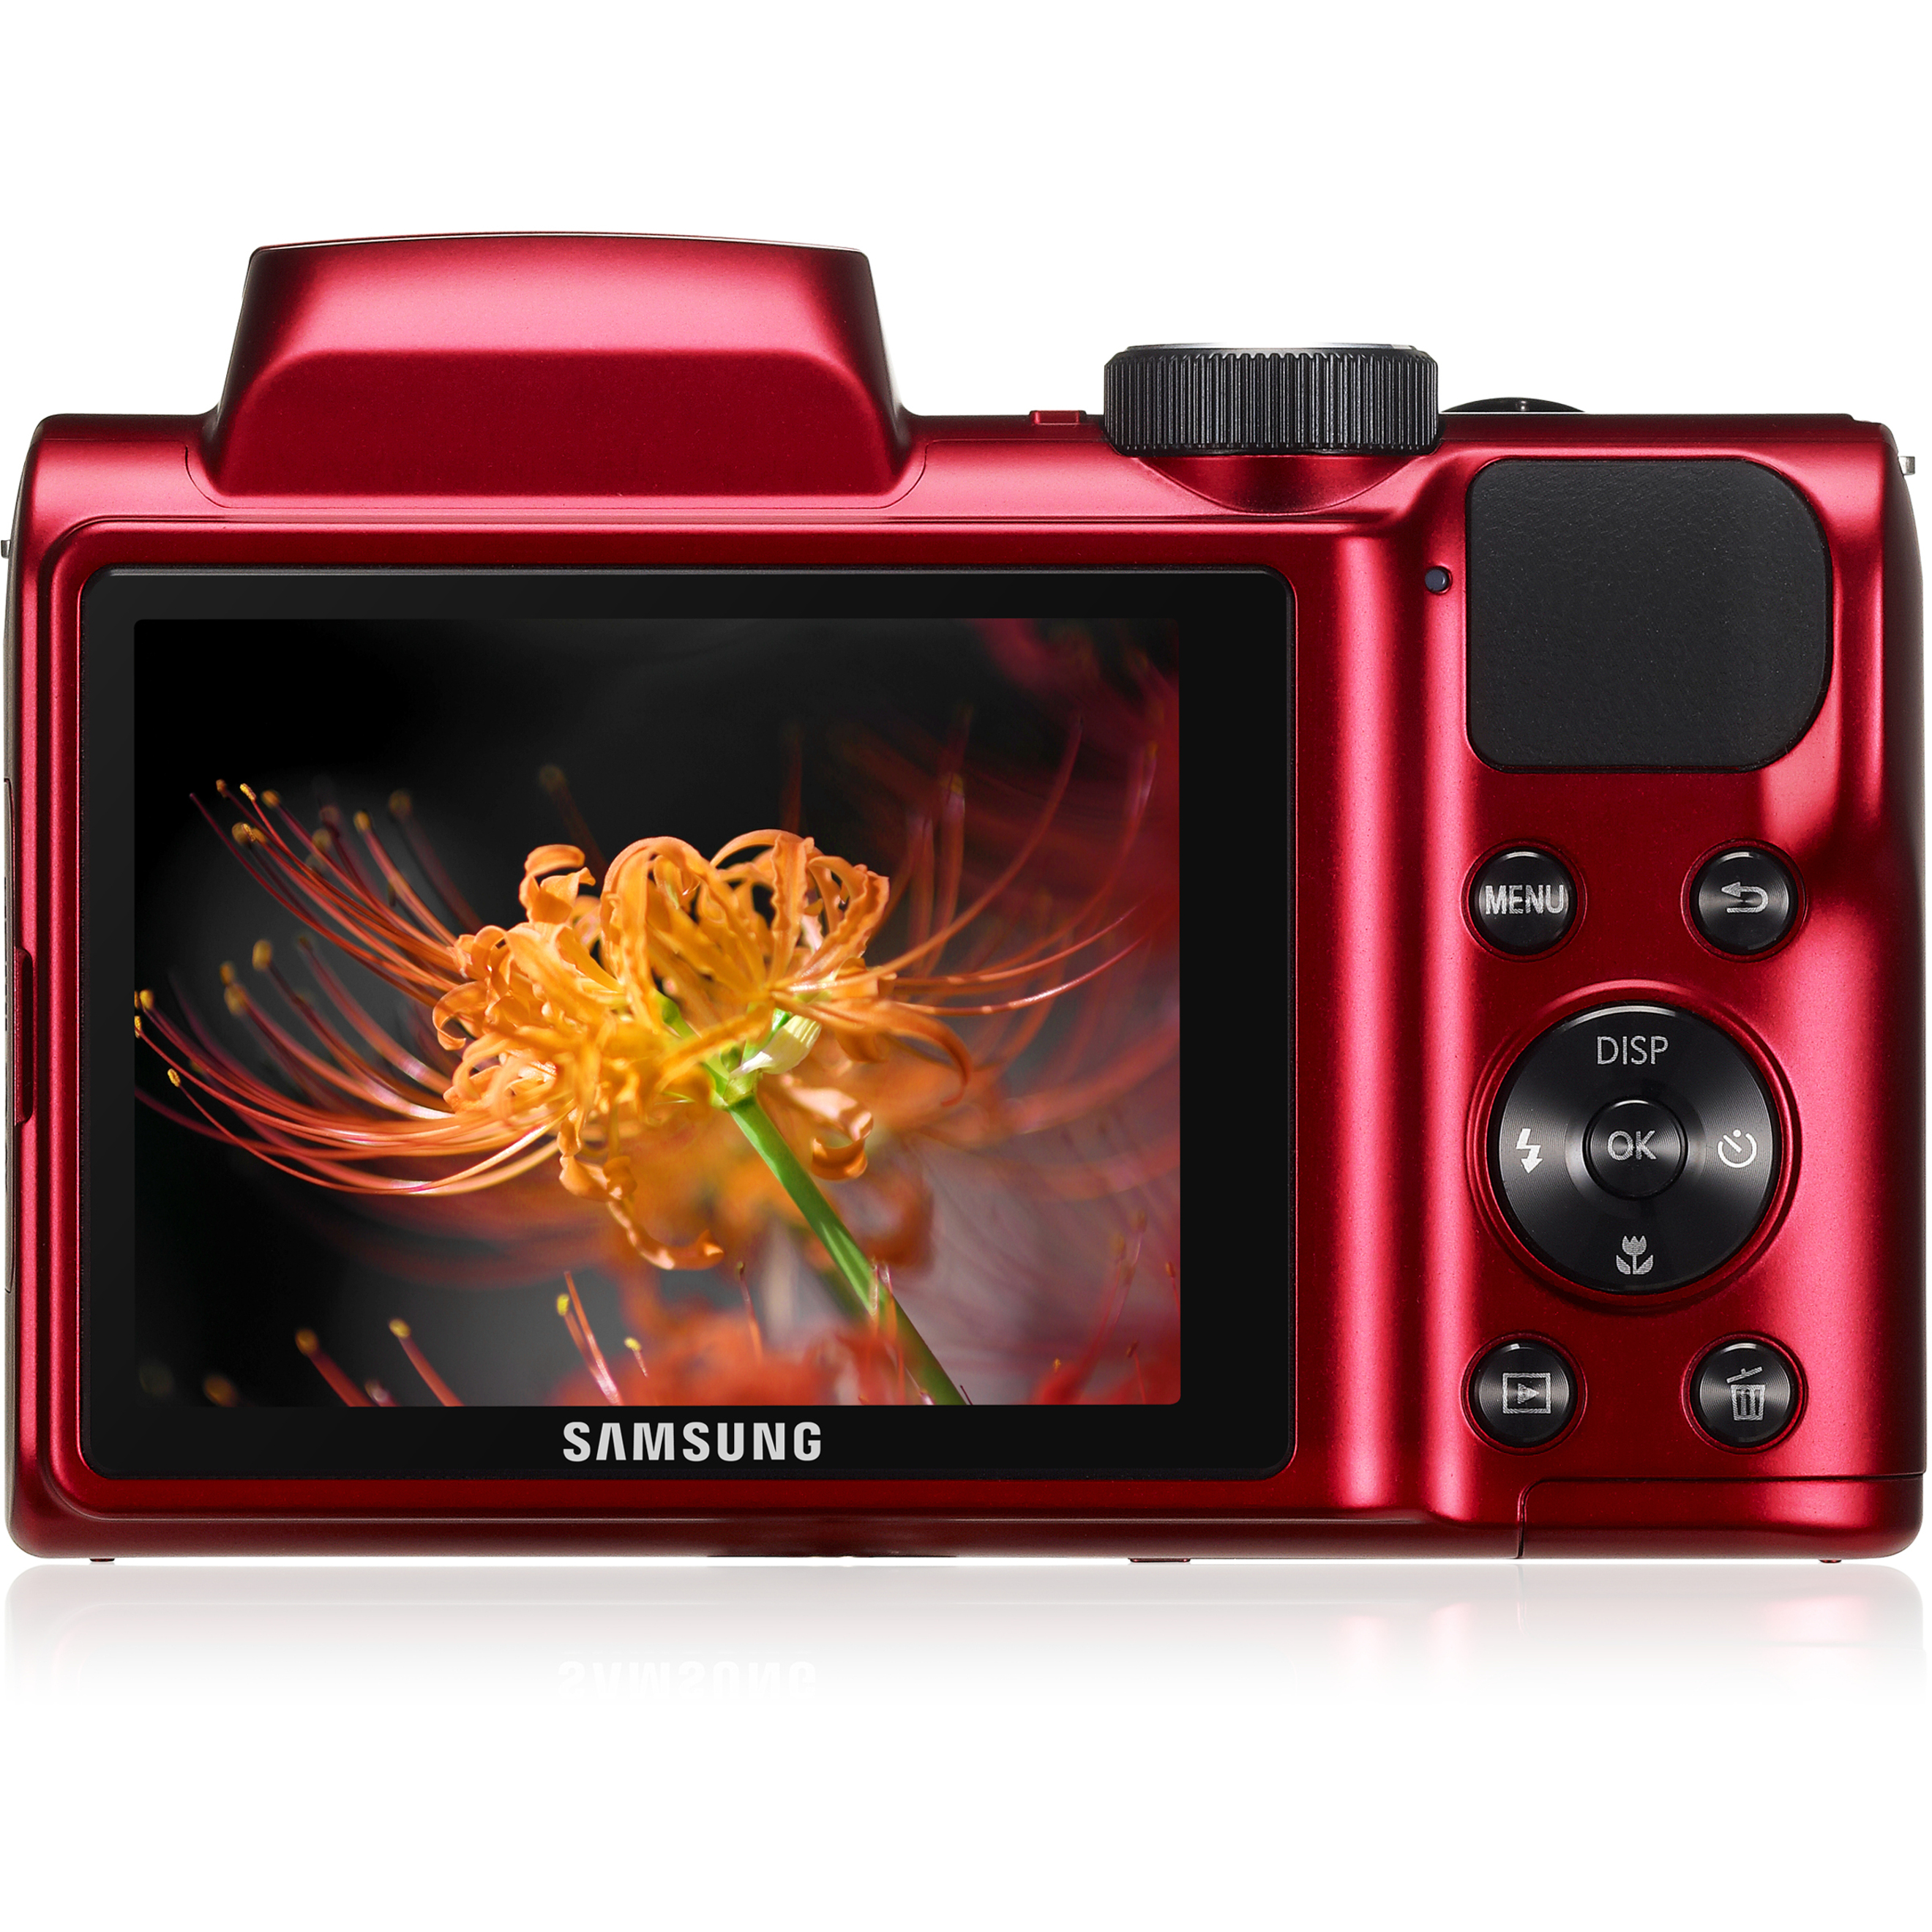 Samsung WB100 16.2 Megapixel Compact Camera, Red - image 5 of 6